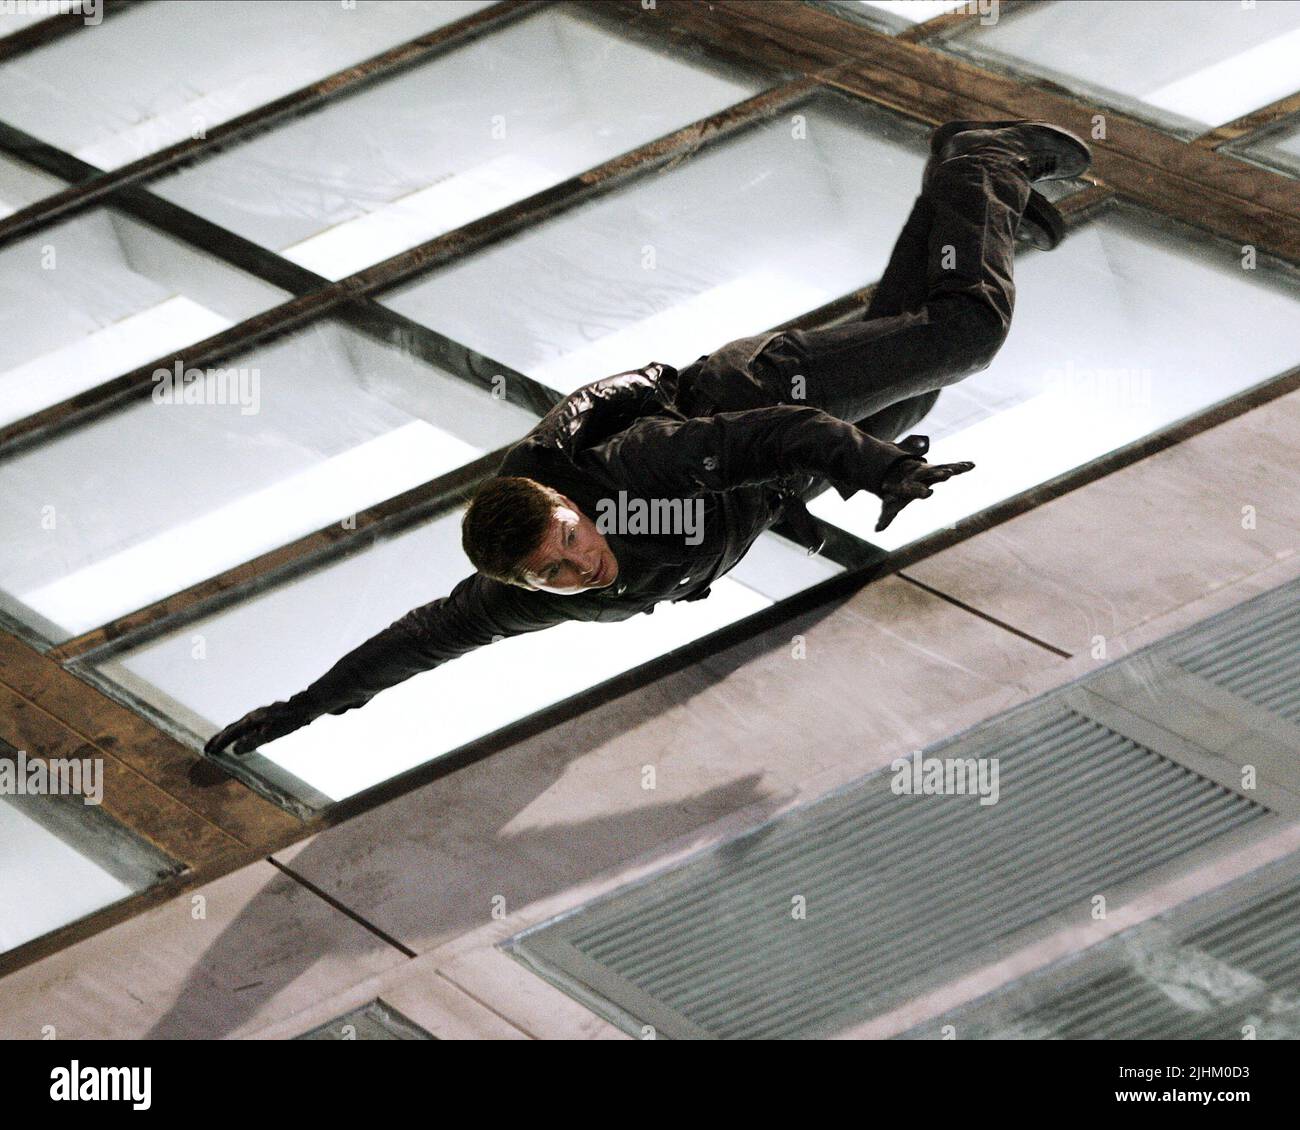 TOM CRUISE, MISSION: IMPOSSIBLE III, 2006 Stock Photo